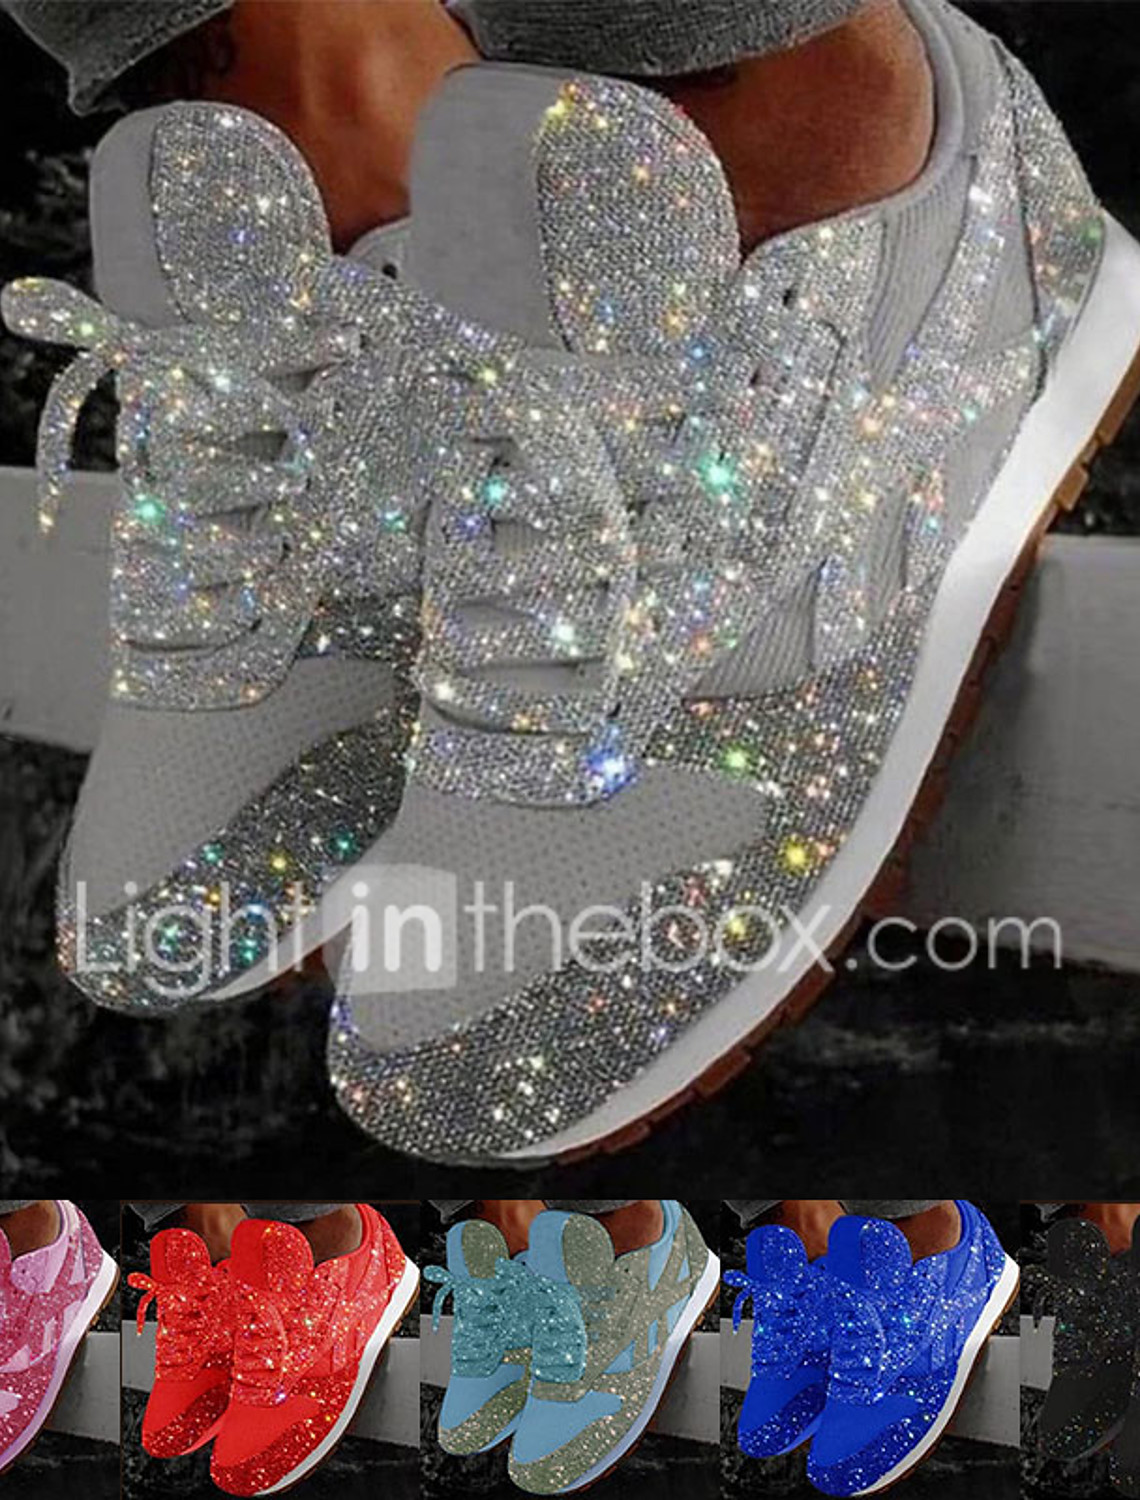 blinged out tennis shoes